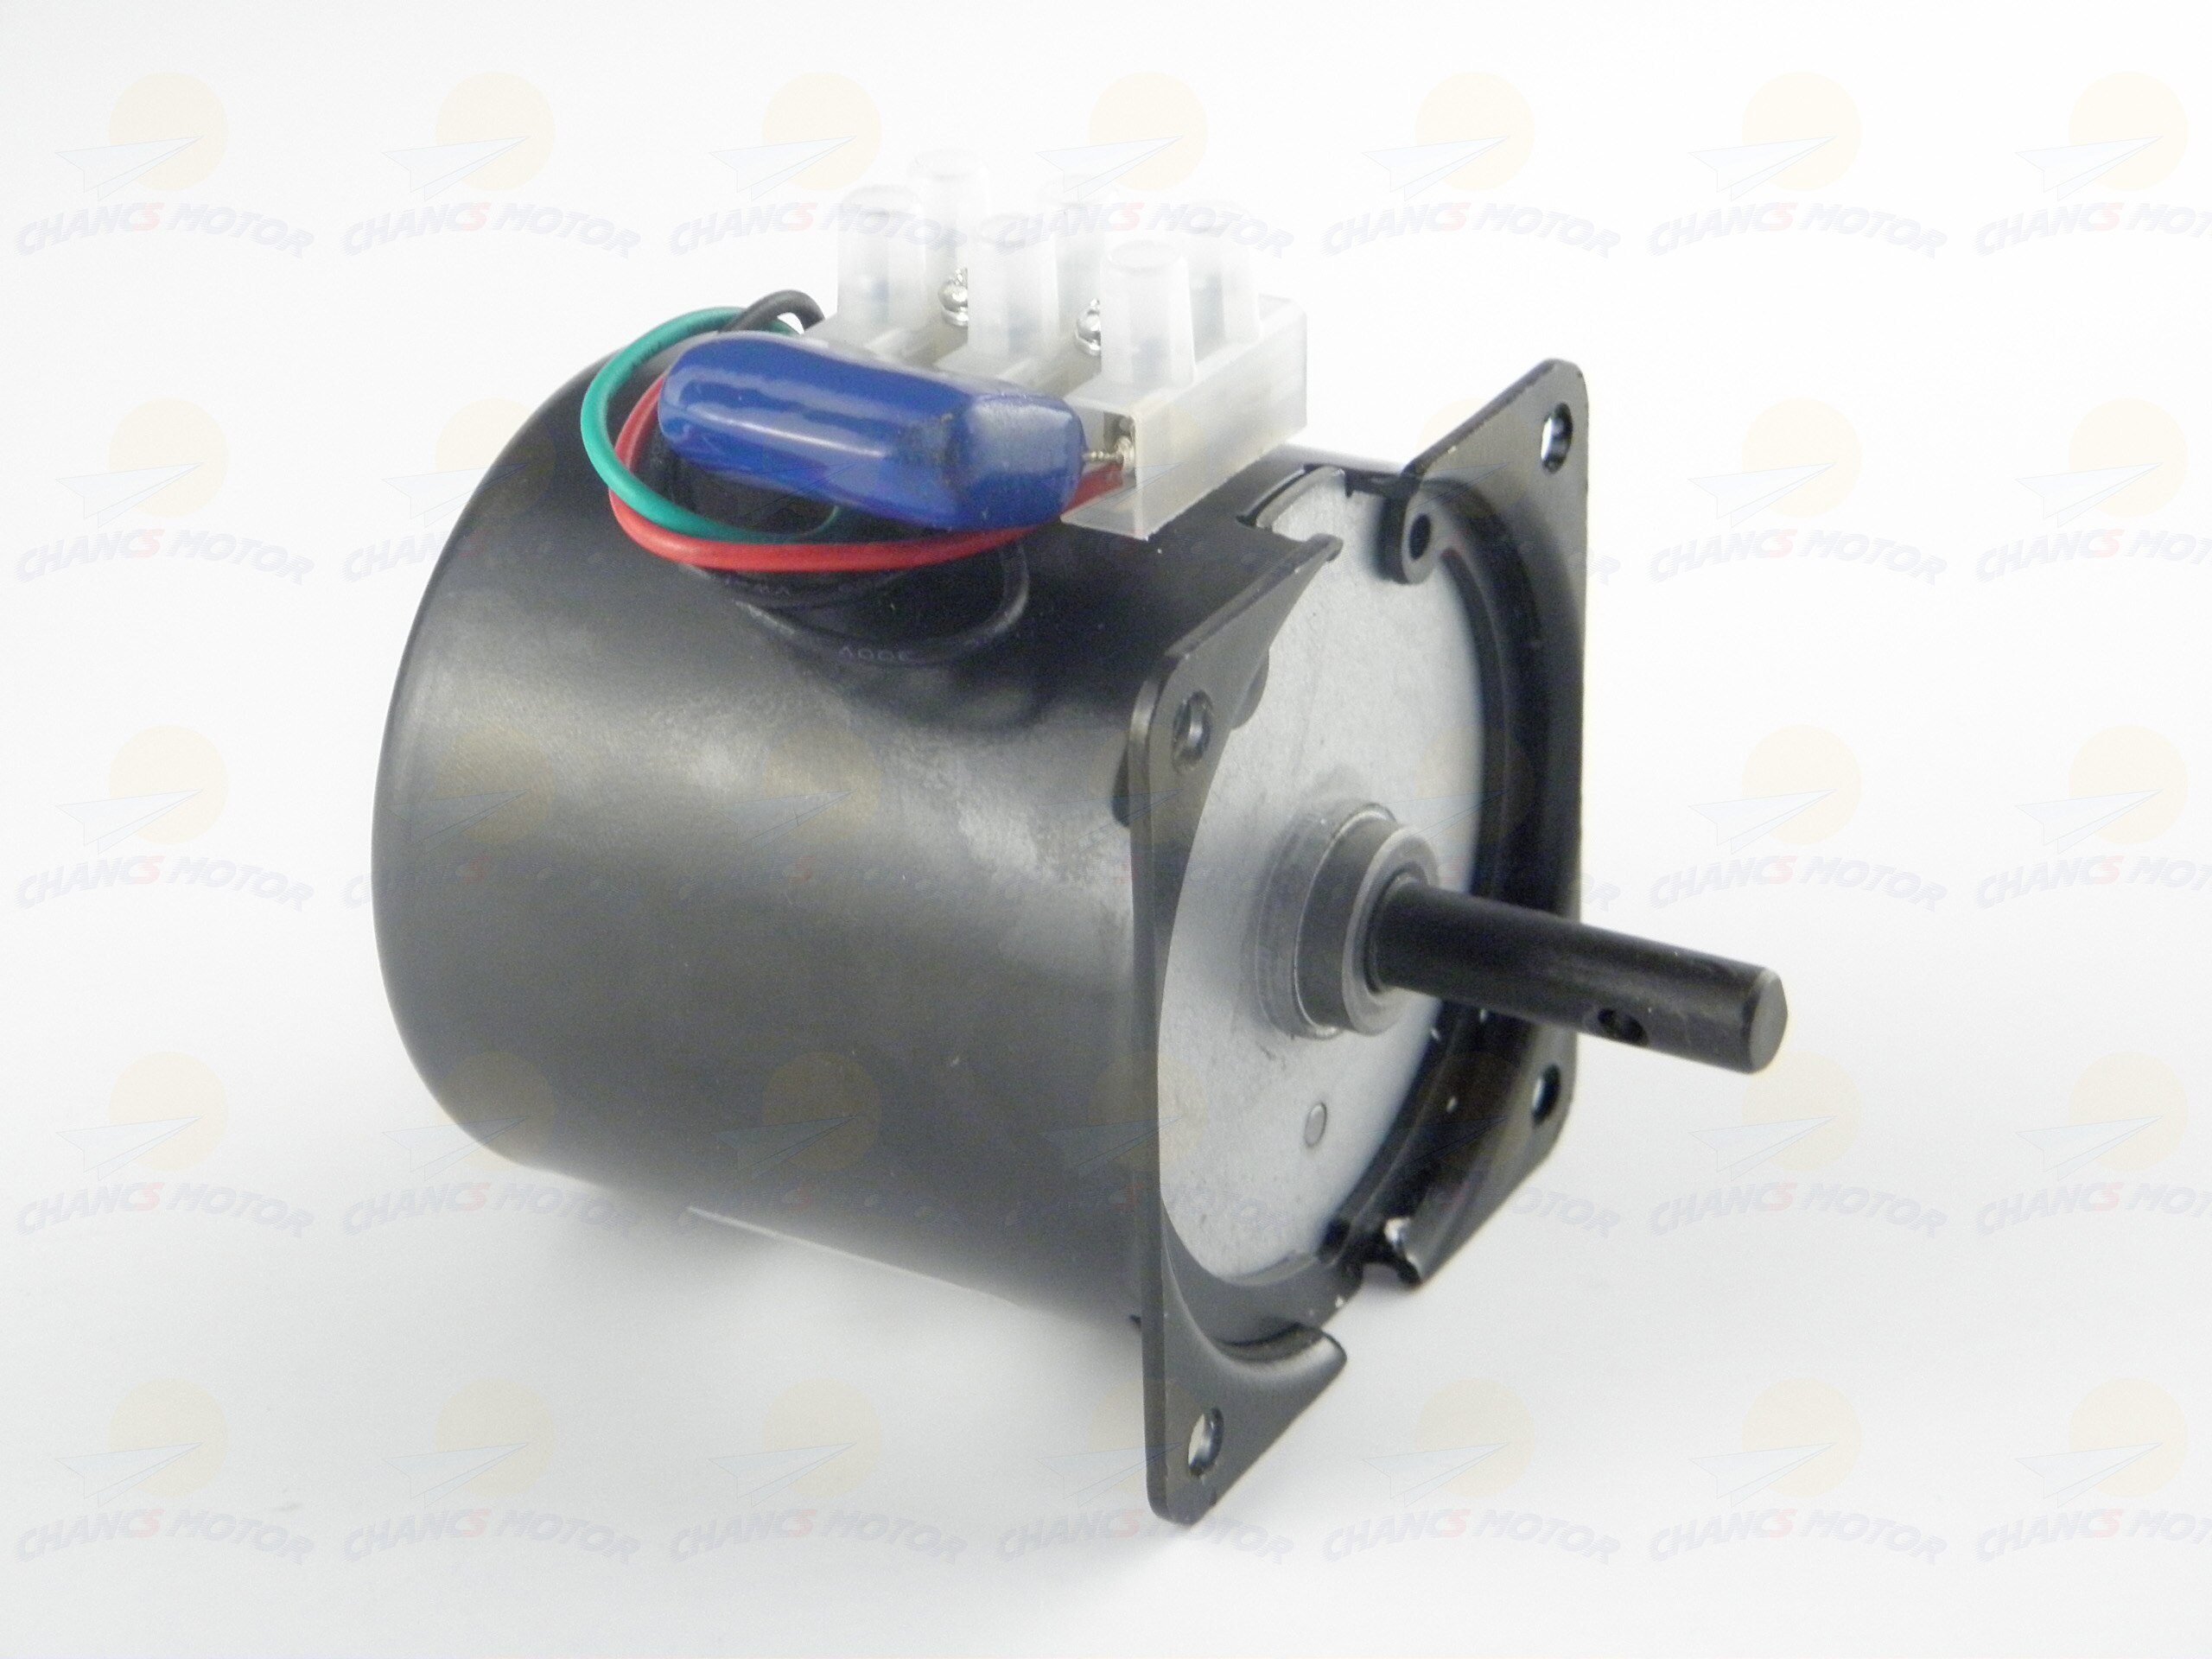 CHANCS 60KTYZ AC Synchronous Motor 110V 1.5RPM Low Noise Electric Motor Barbecue High Torque Geared Motor Reduction Reversible